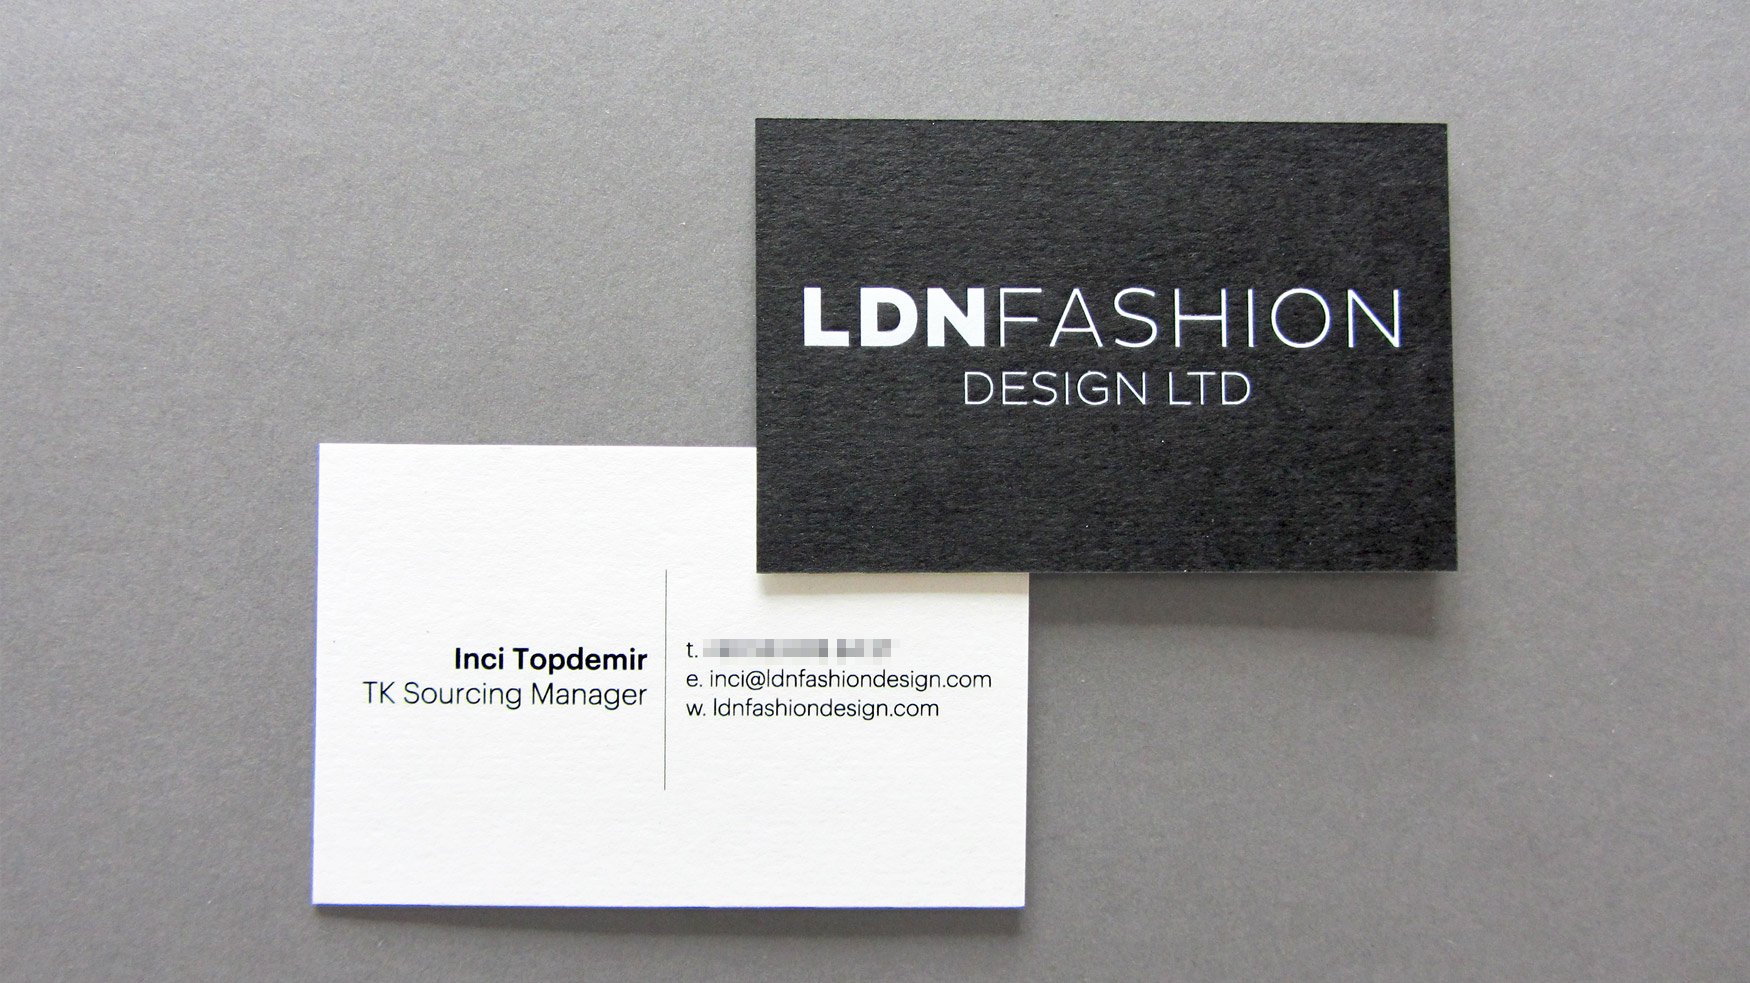 Fashion Design Business Cards Best Of Ldn Fashion Design Business Card Freestyle Print London Printers Uk